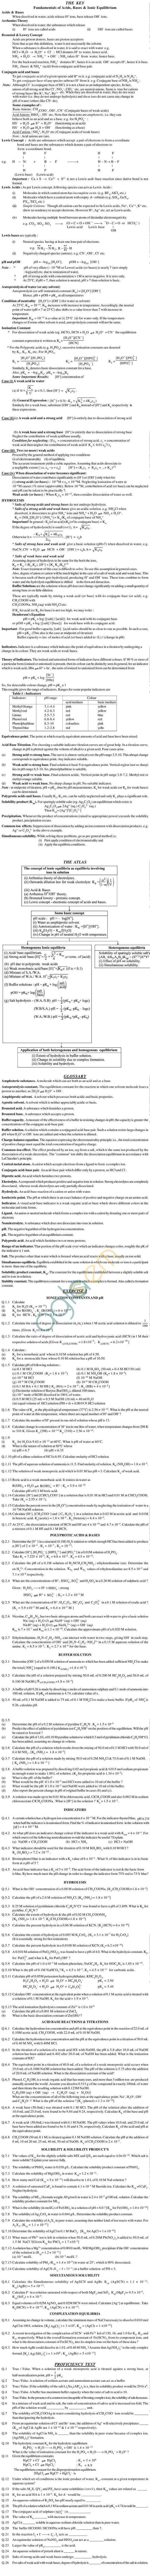 Chemistry Study Material - Chapter 7